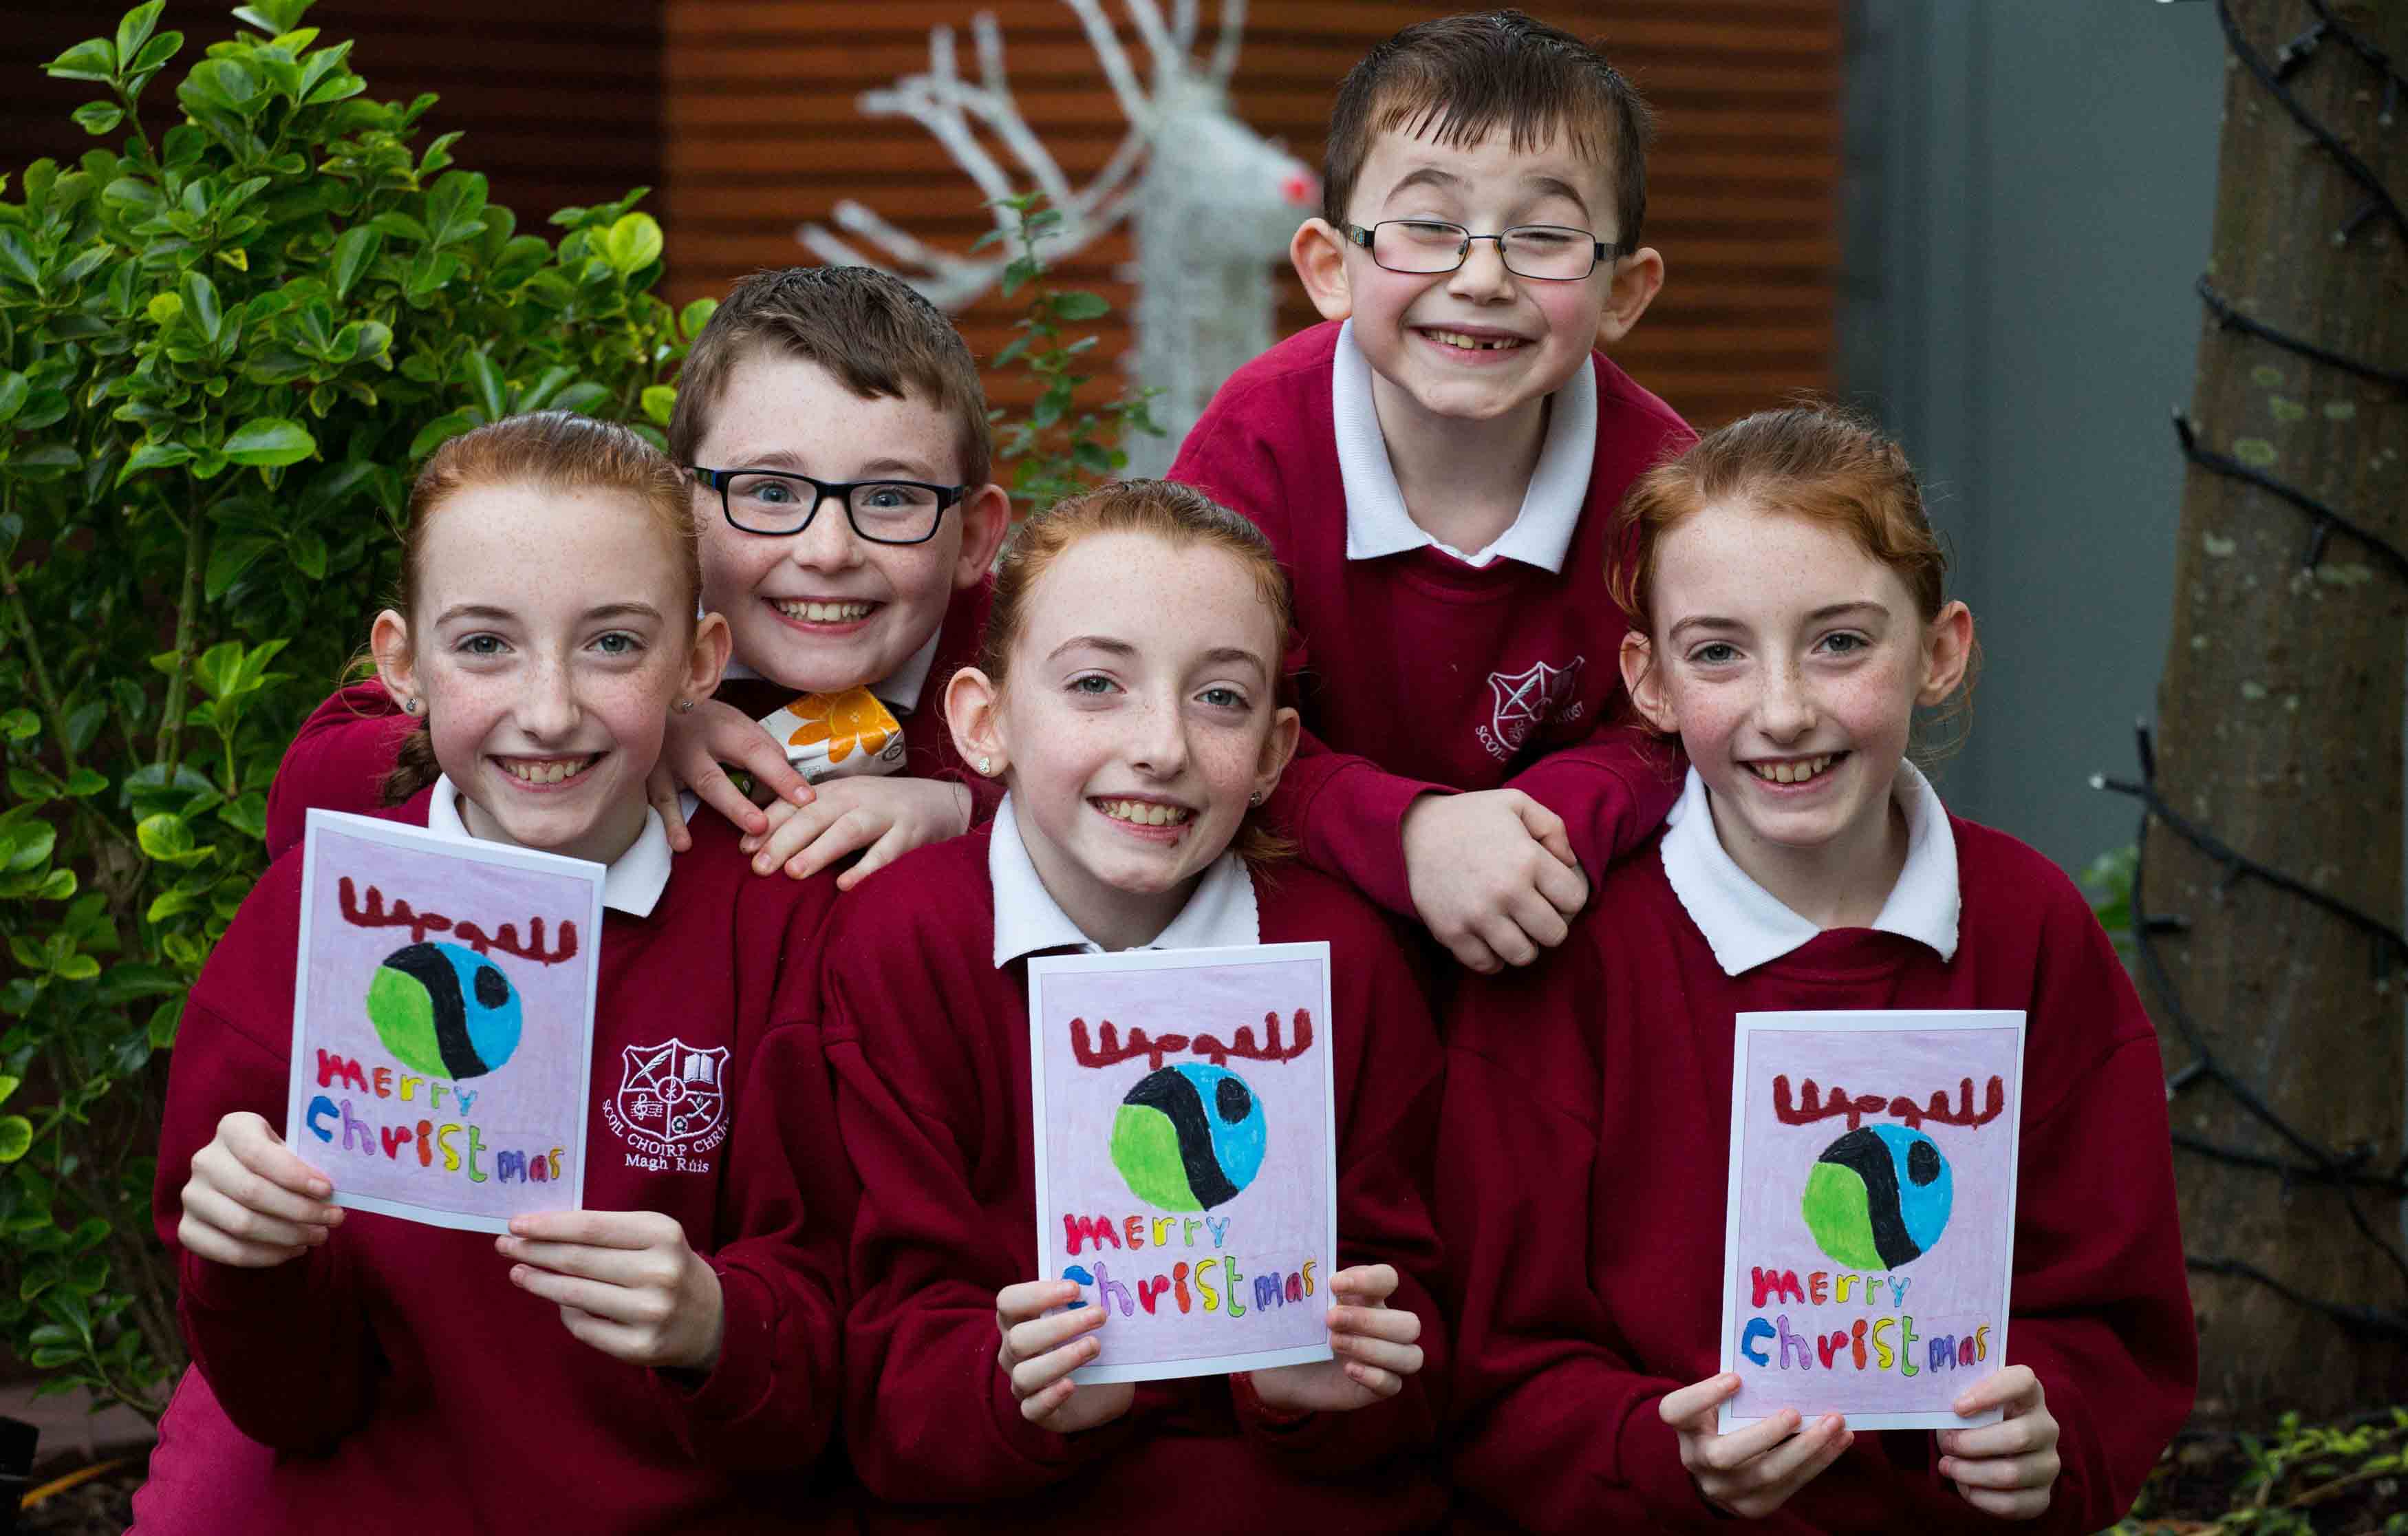 Limerick Fairtrade Christmas Card Competition winners announced